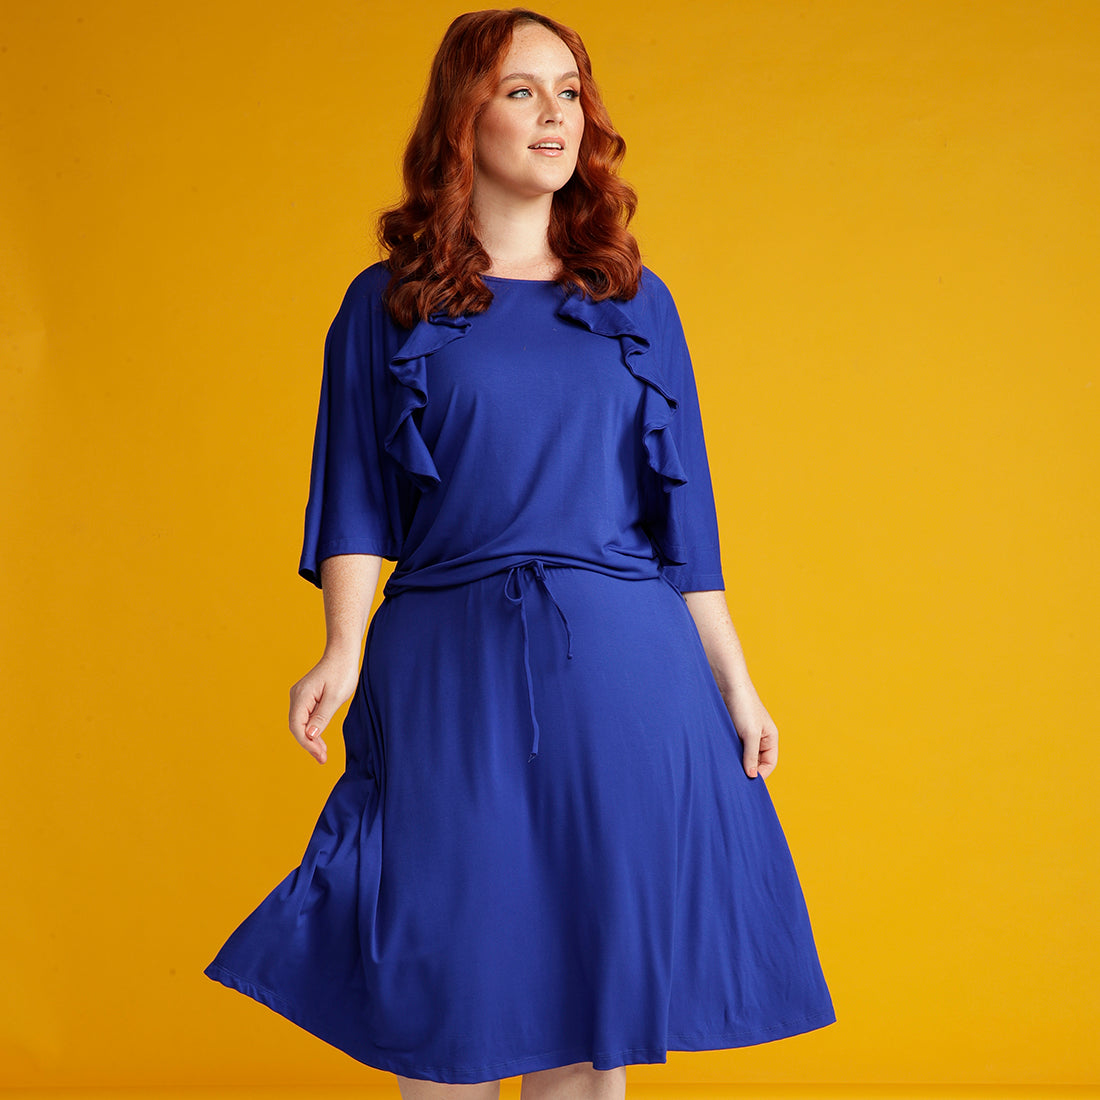 Red haired woman in blue dress with ruffle detail